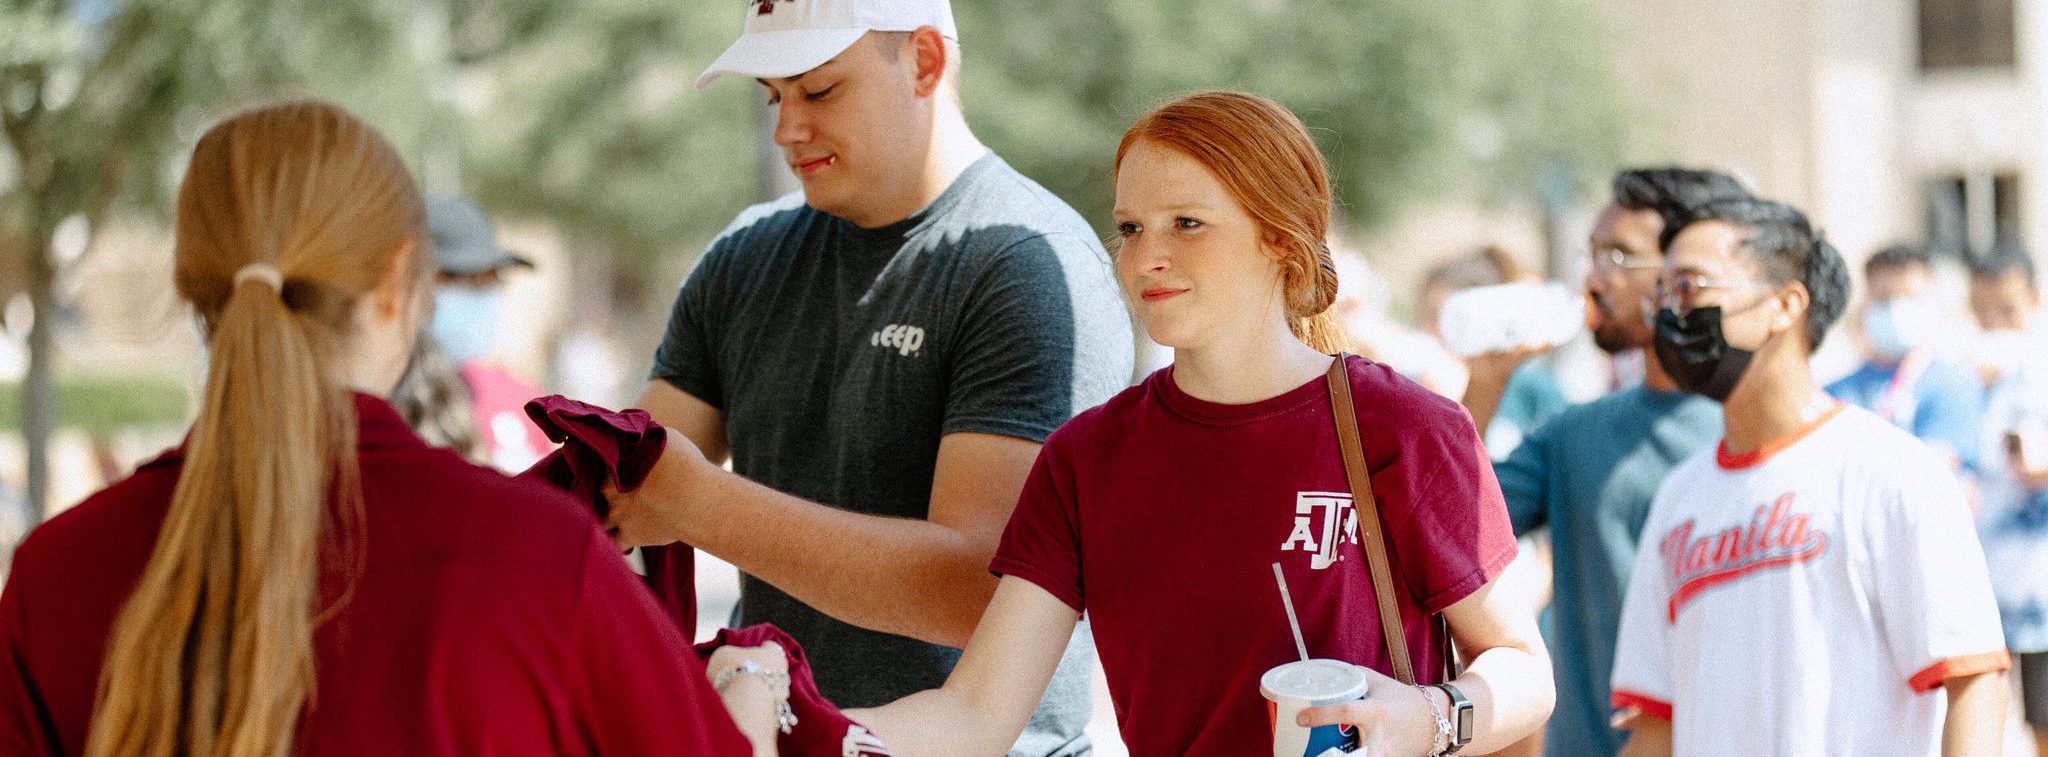 Students receiving free items at Howdy Week events